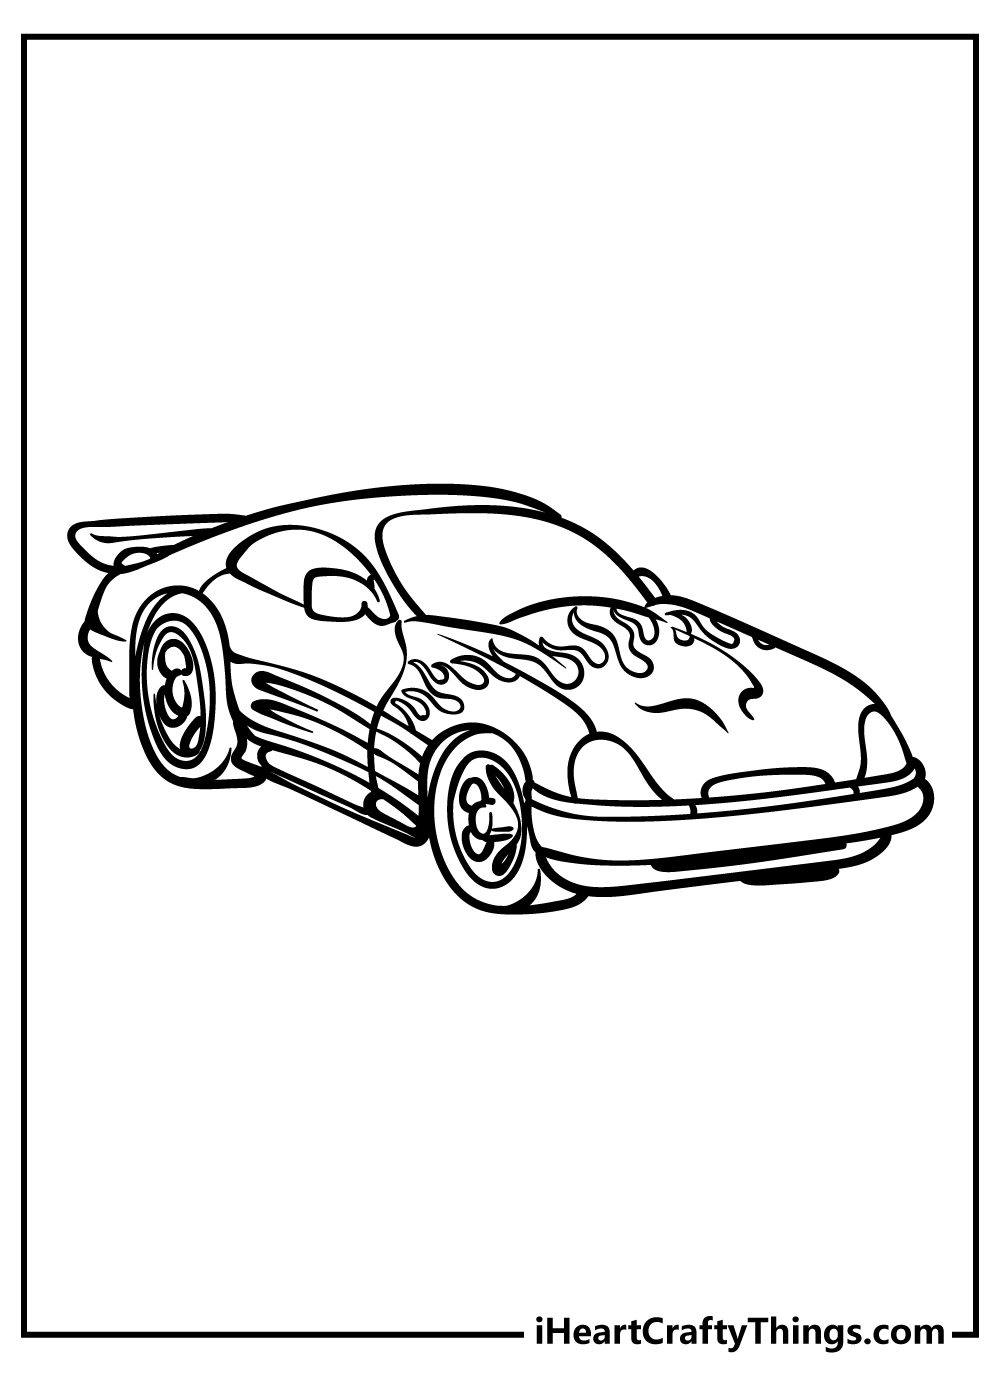 Race Car Coloring Pages free pdf download